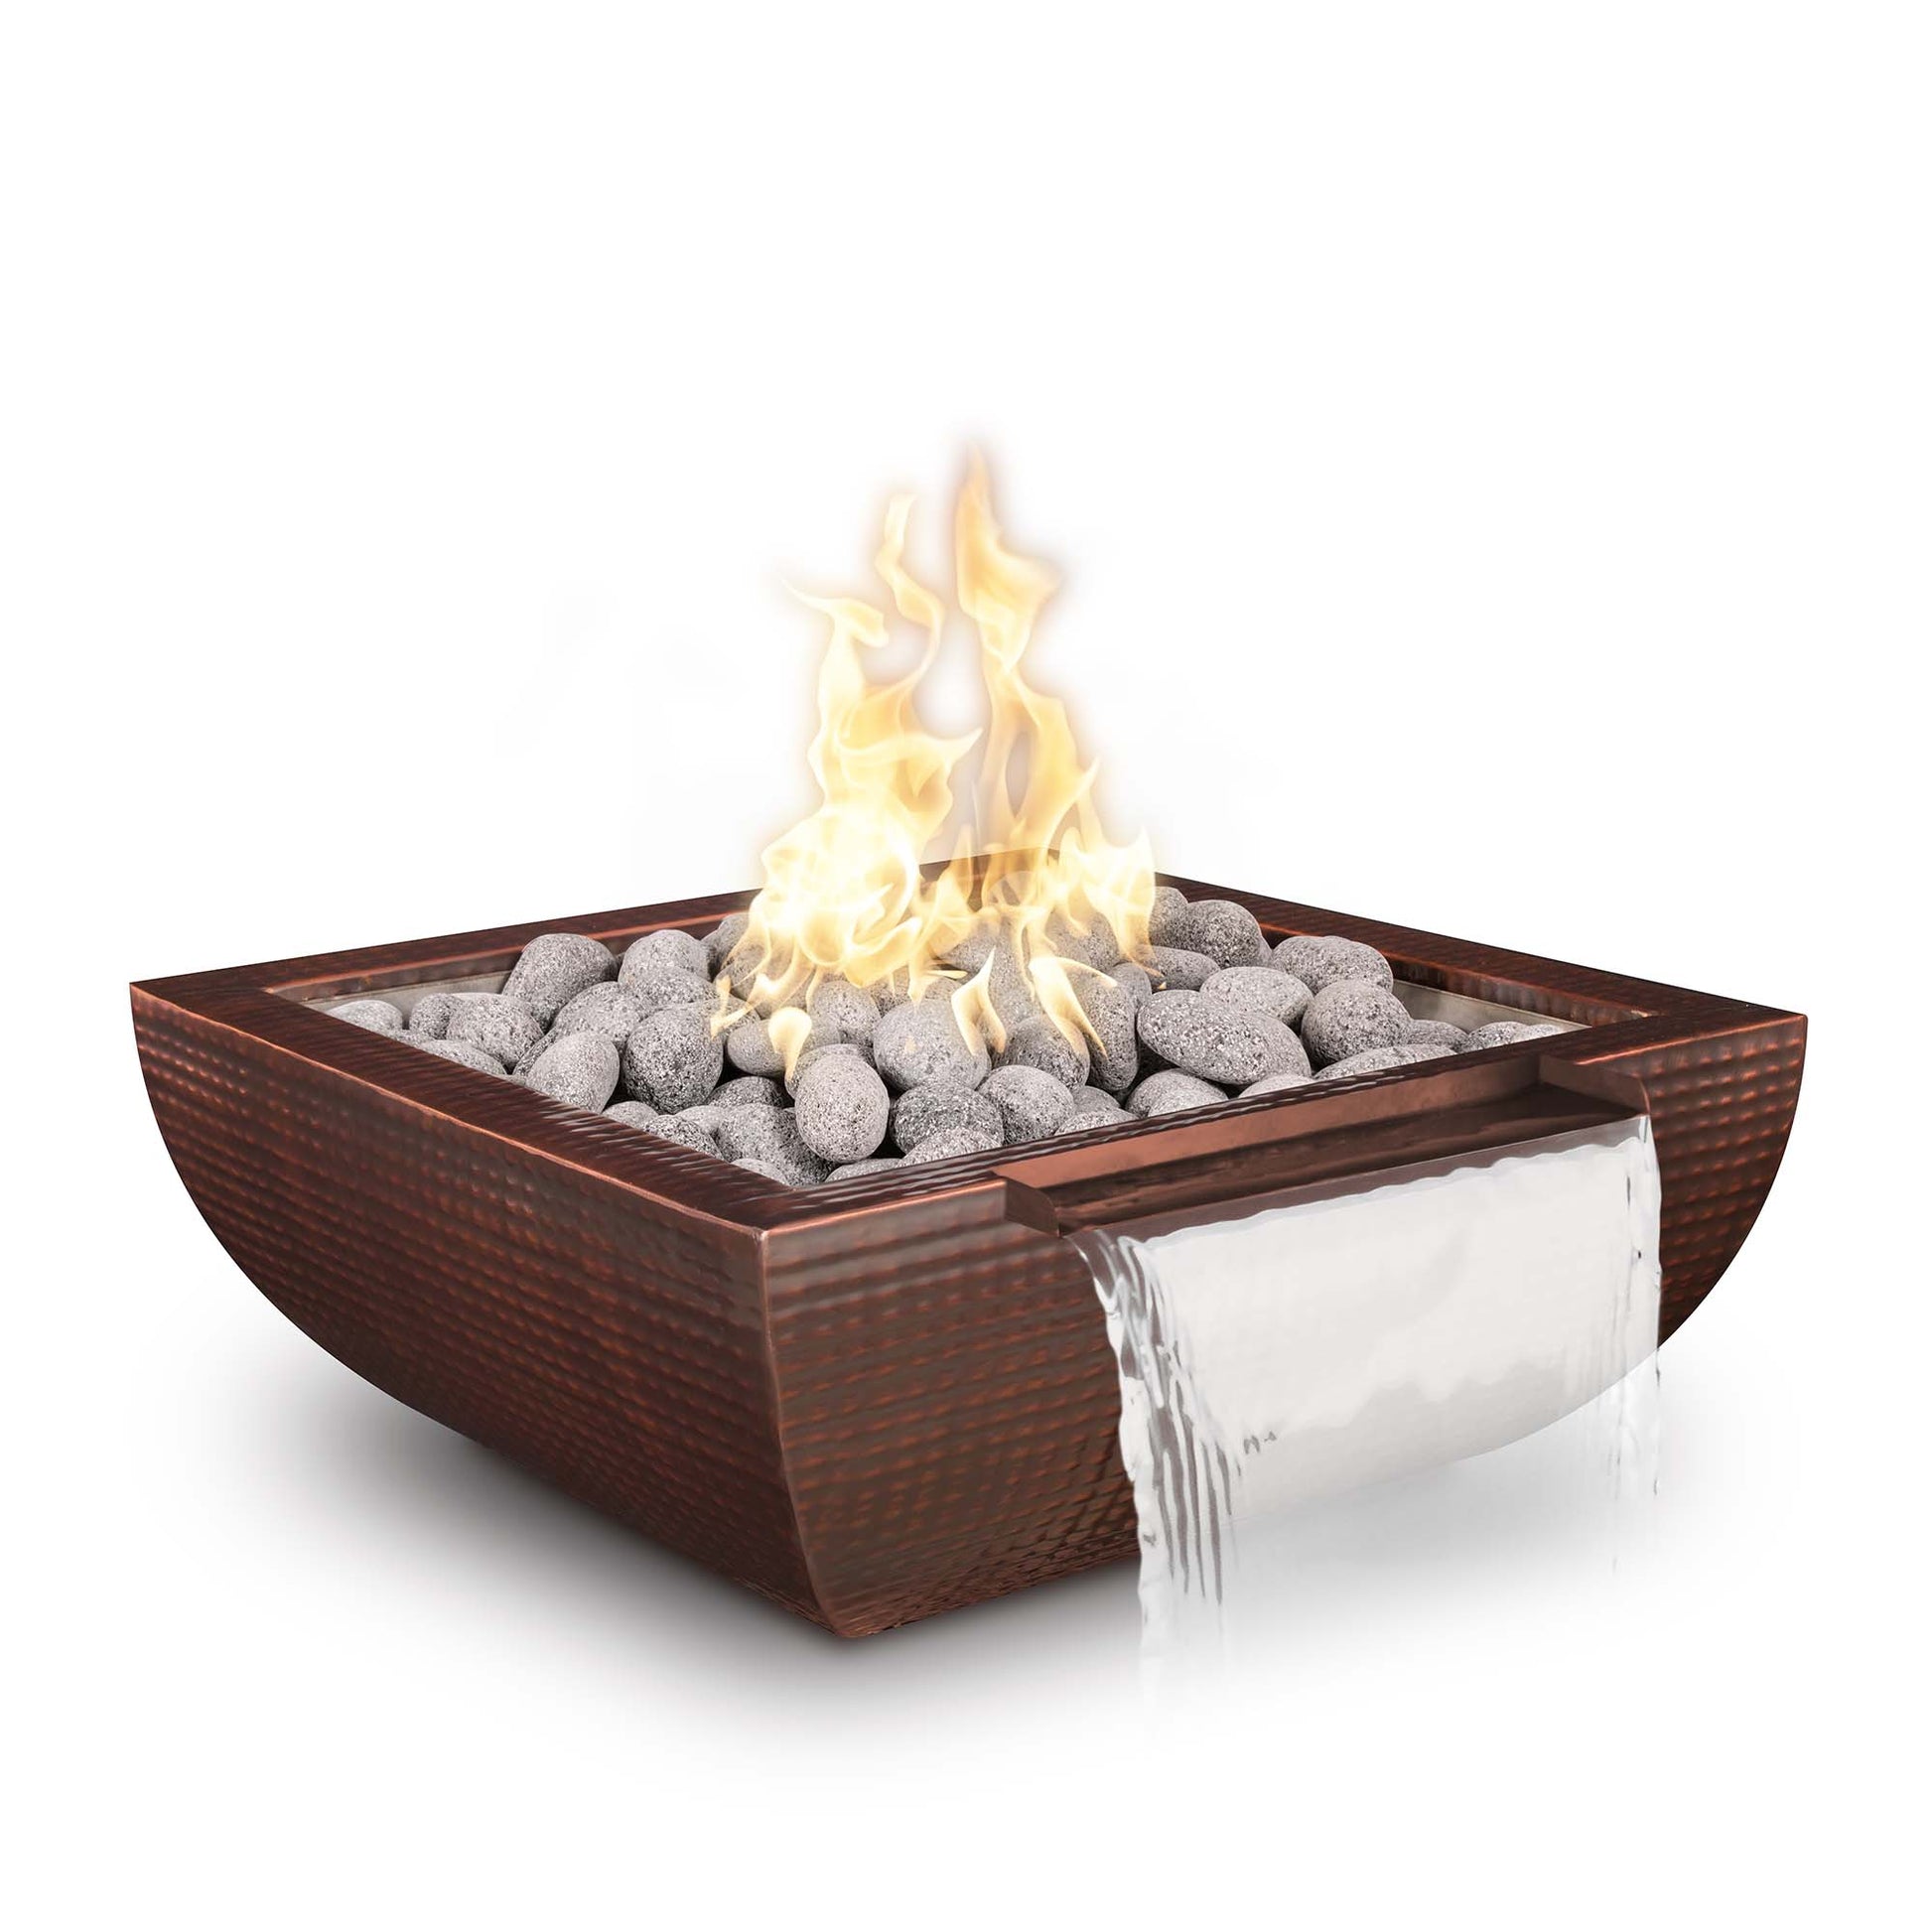 The Outdoor Plus Avalon Wide Spill 24" Java Powder Coated Metal Liquid Propane Fire & Water Bowl with Match Lit Ignition